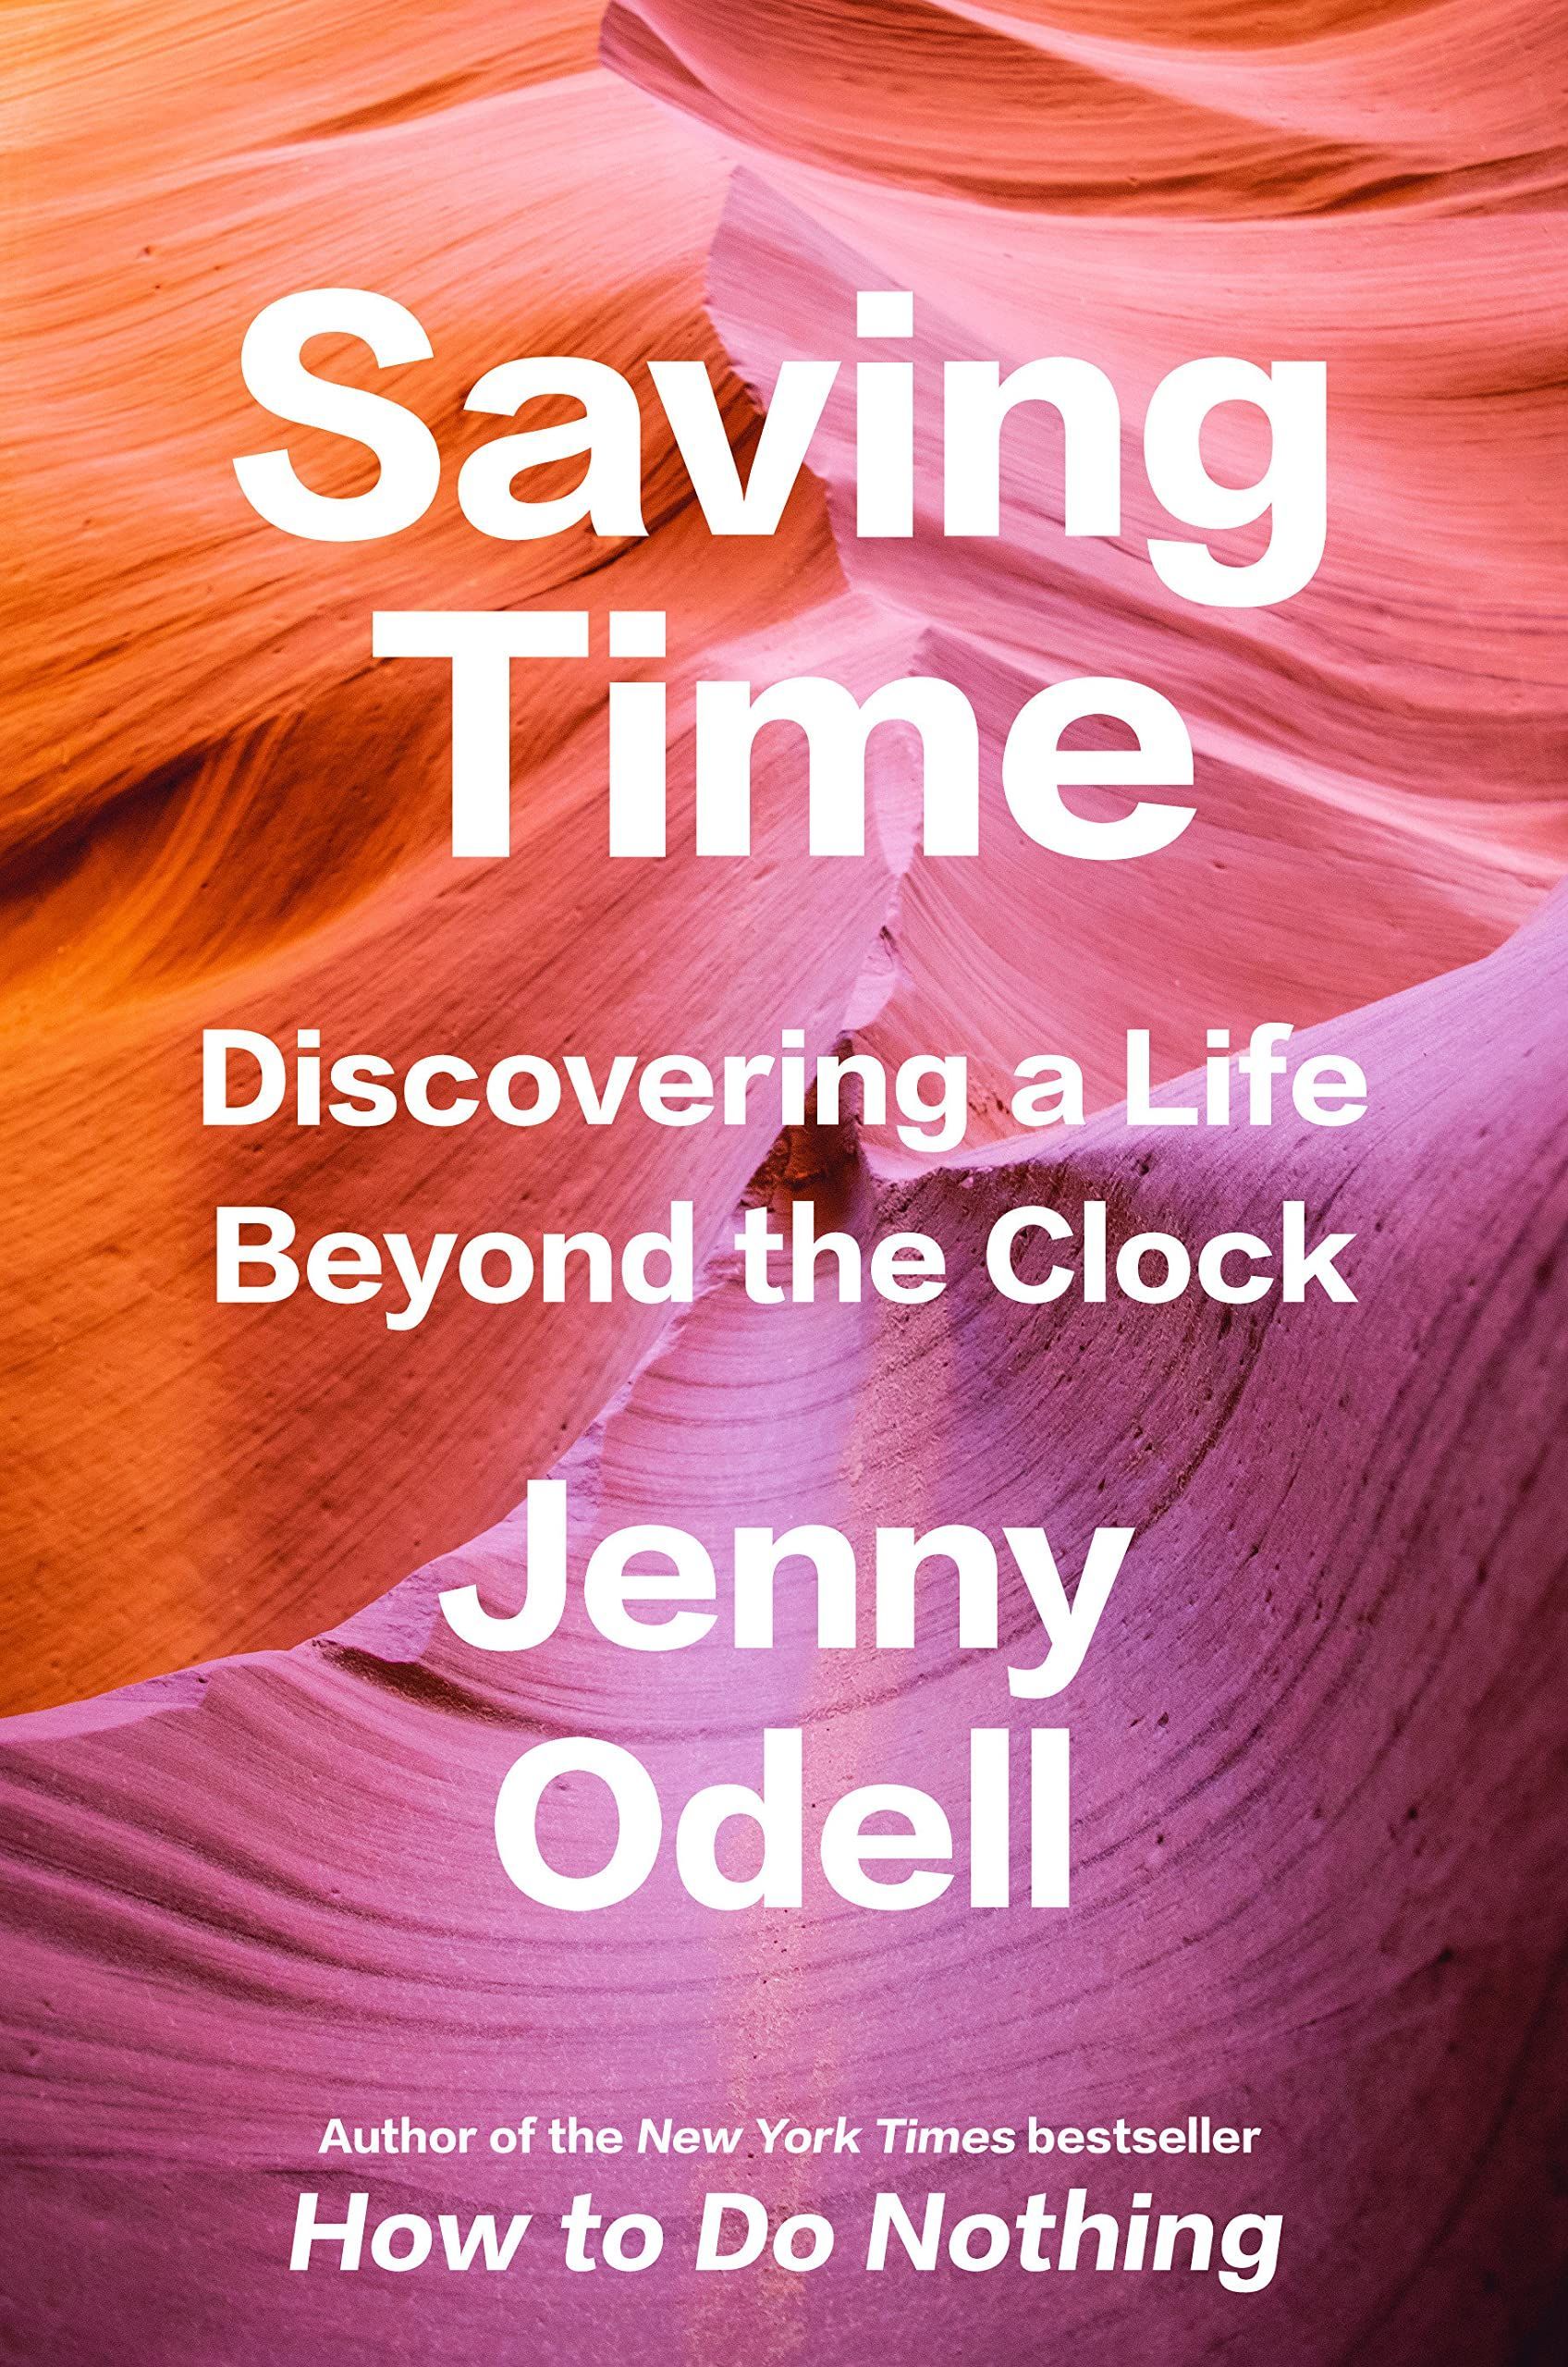 The Flat Circle: On Jenny Odell’s “Saving Time”